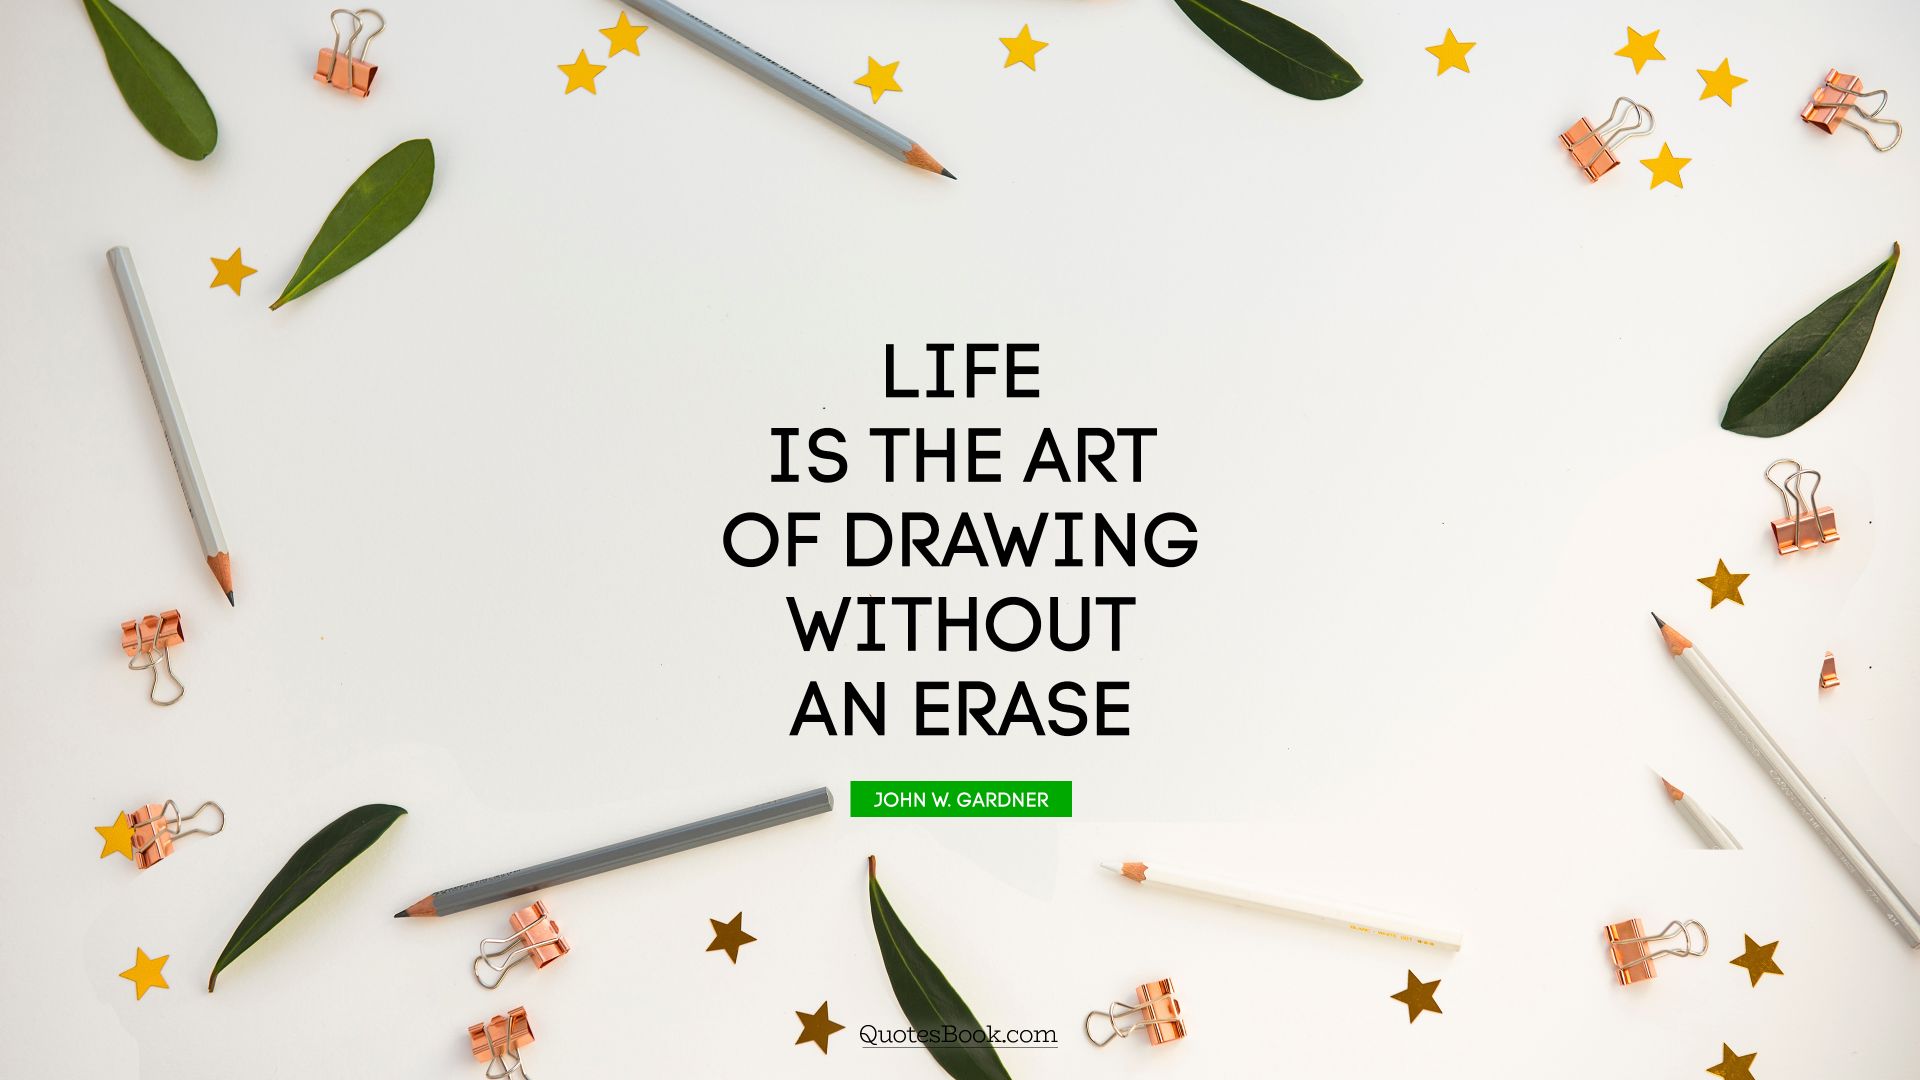 Life is the art of drawing without an erase. - Quote by John W. Gardner